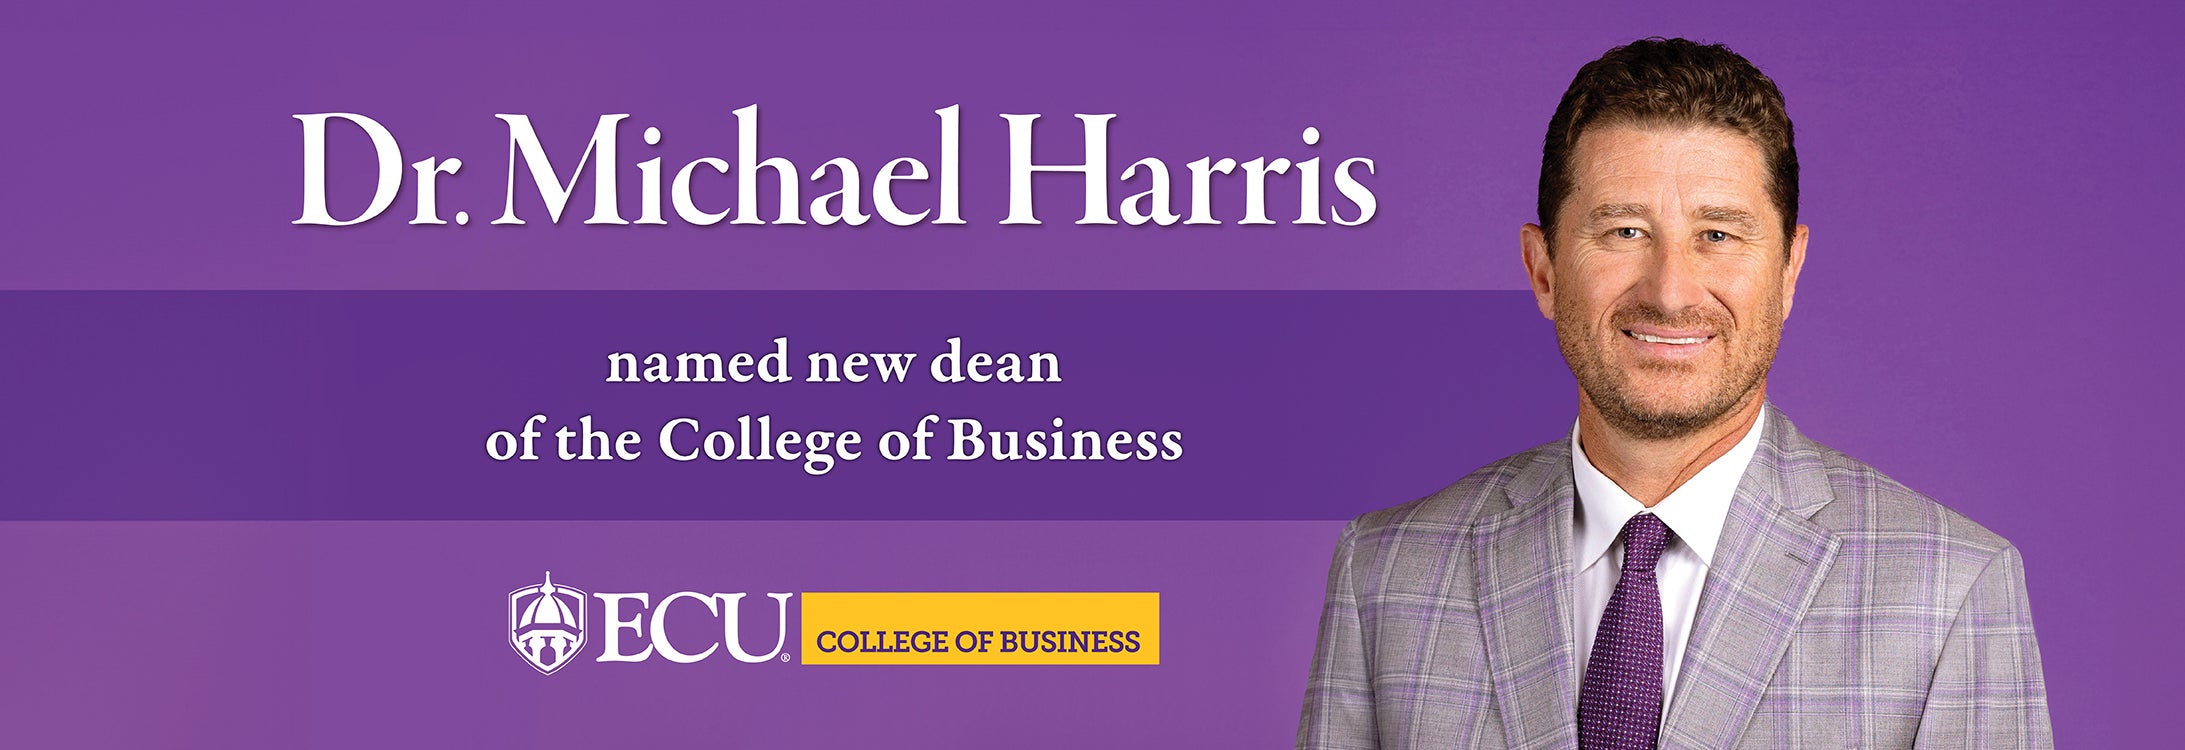 Dr. Michael Harris, named new dean of ECU College of Business